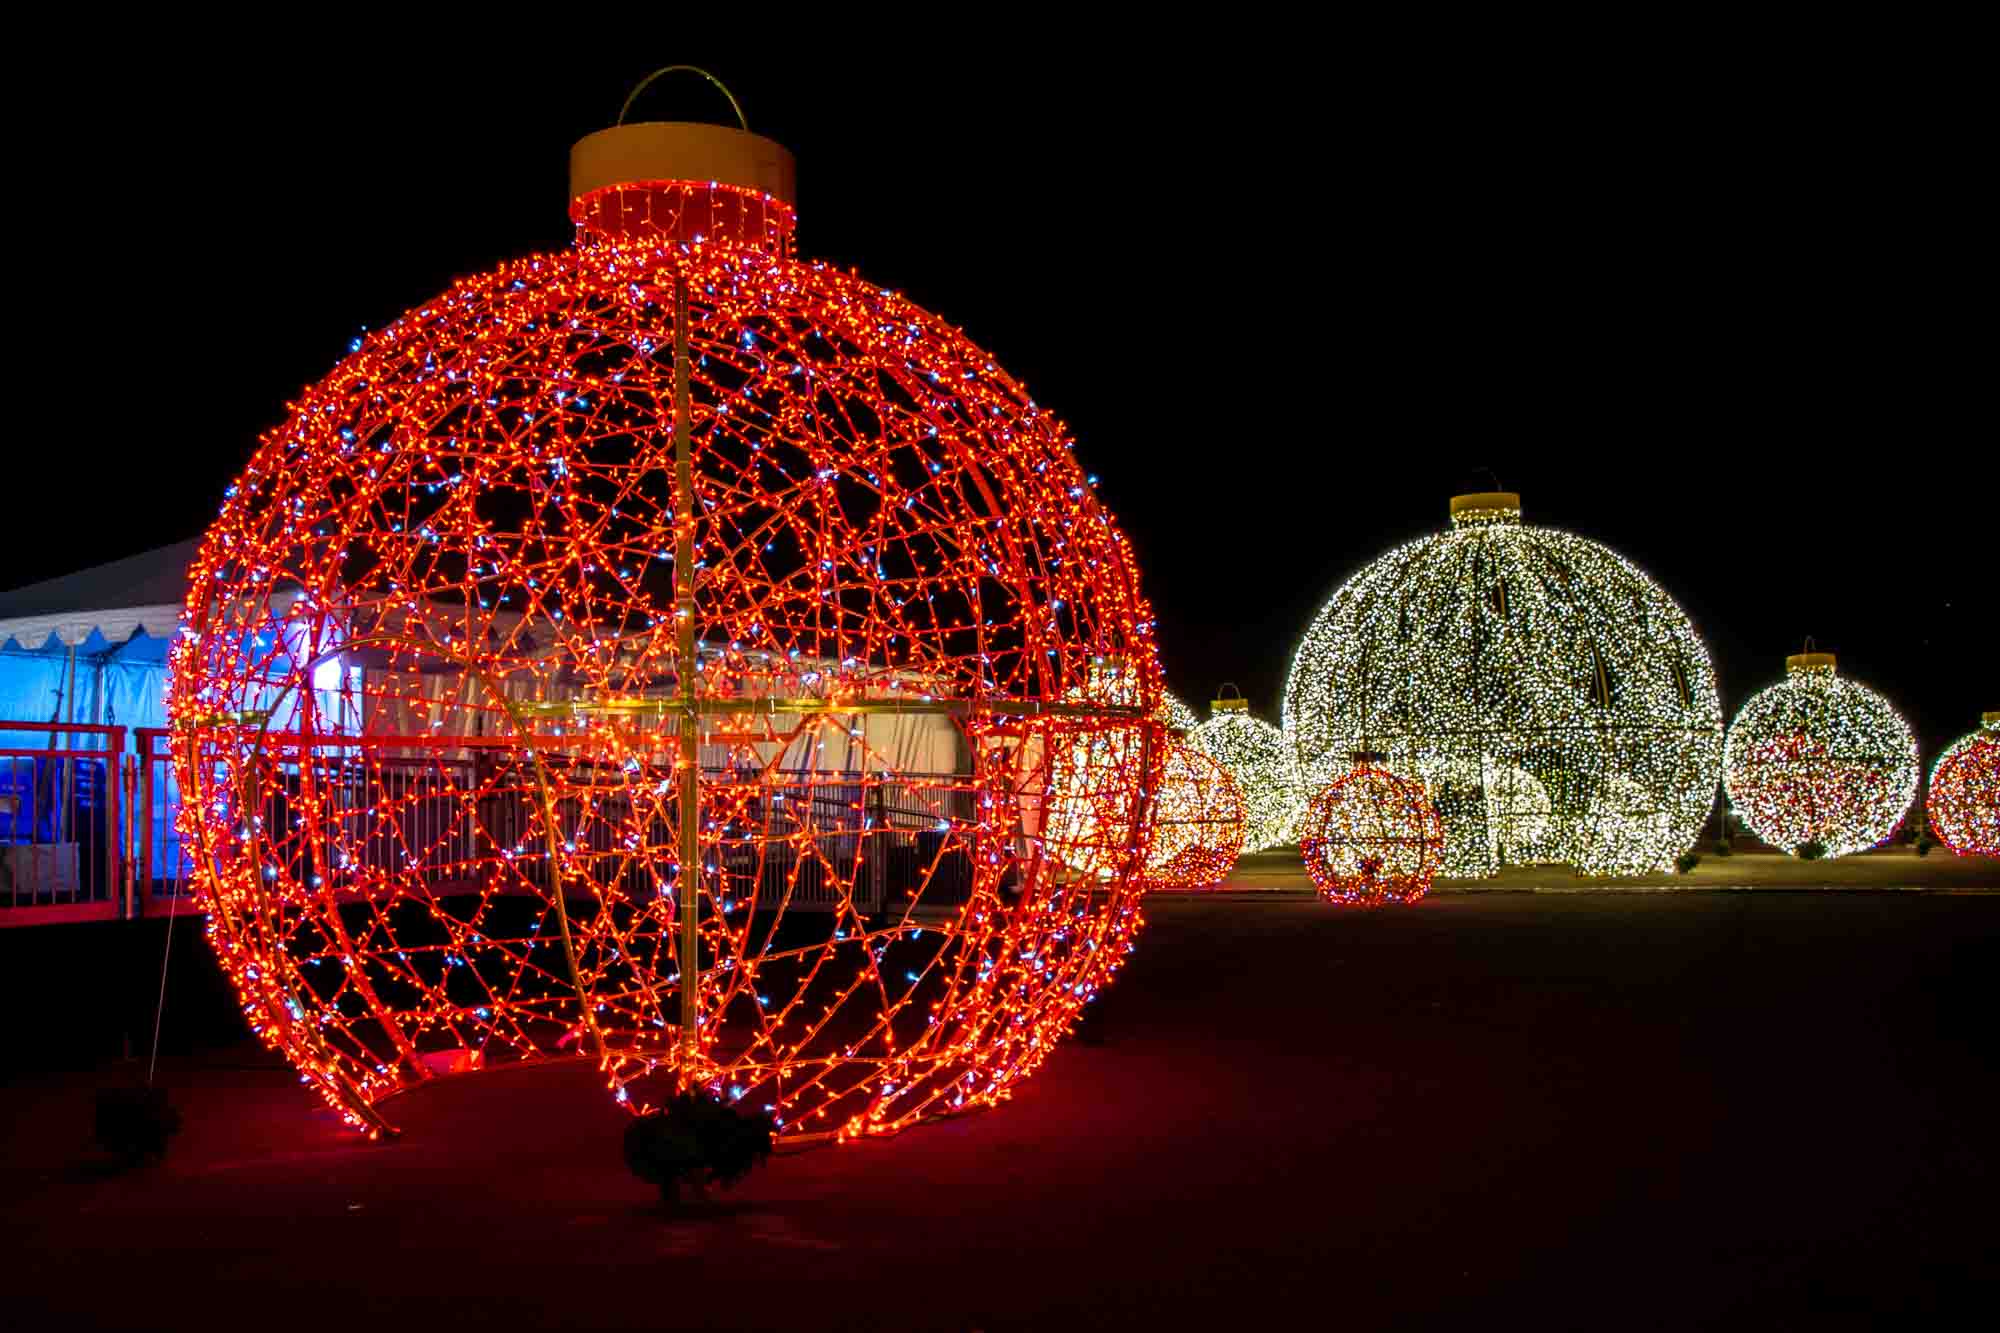 Giant red and white illuminated Christmas ornaments